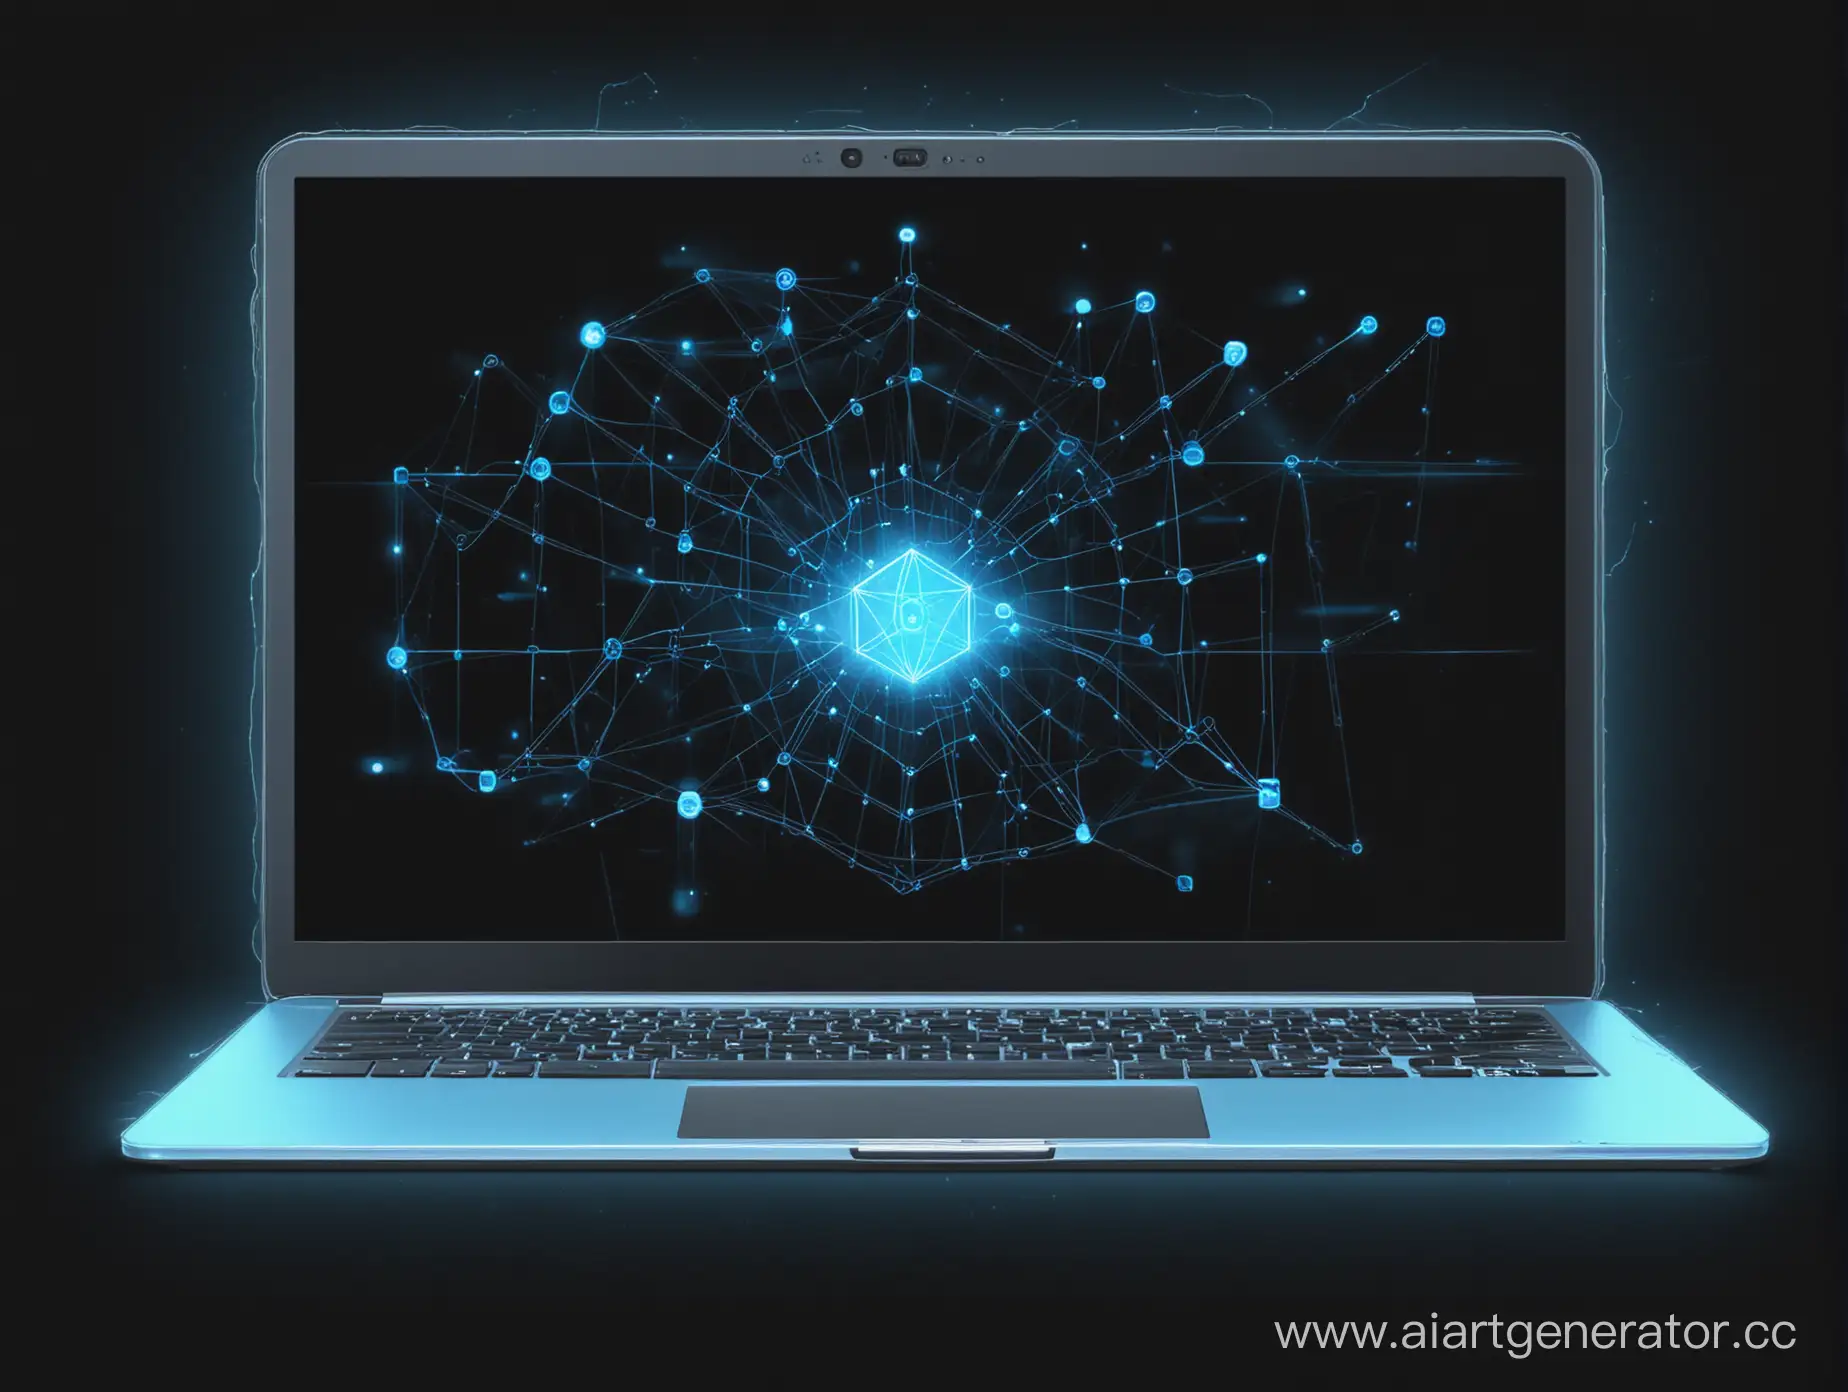 Tech-Connections-Laptop-Hex-Gem-and-Telegram-Logo-on-Dark-Background-with-Blue-Glow